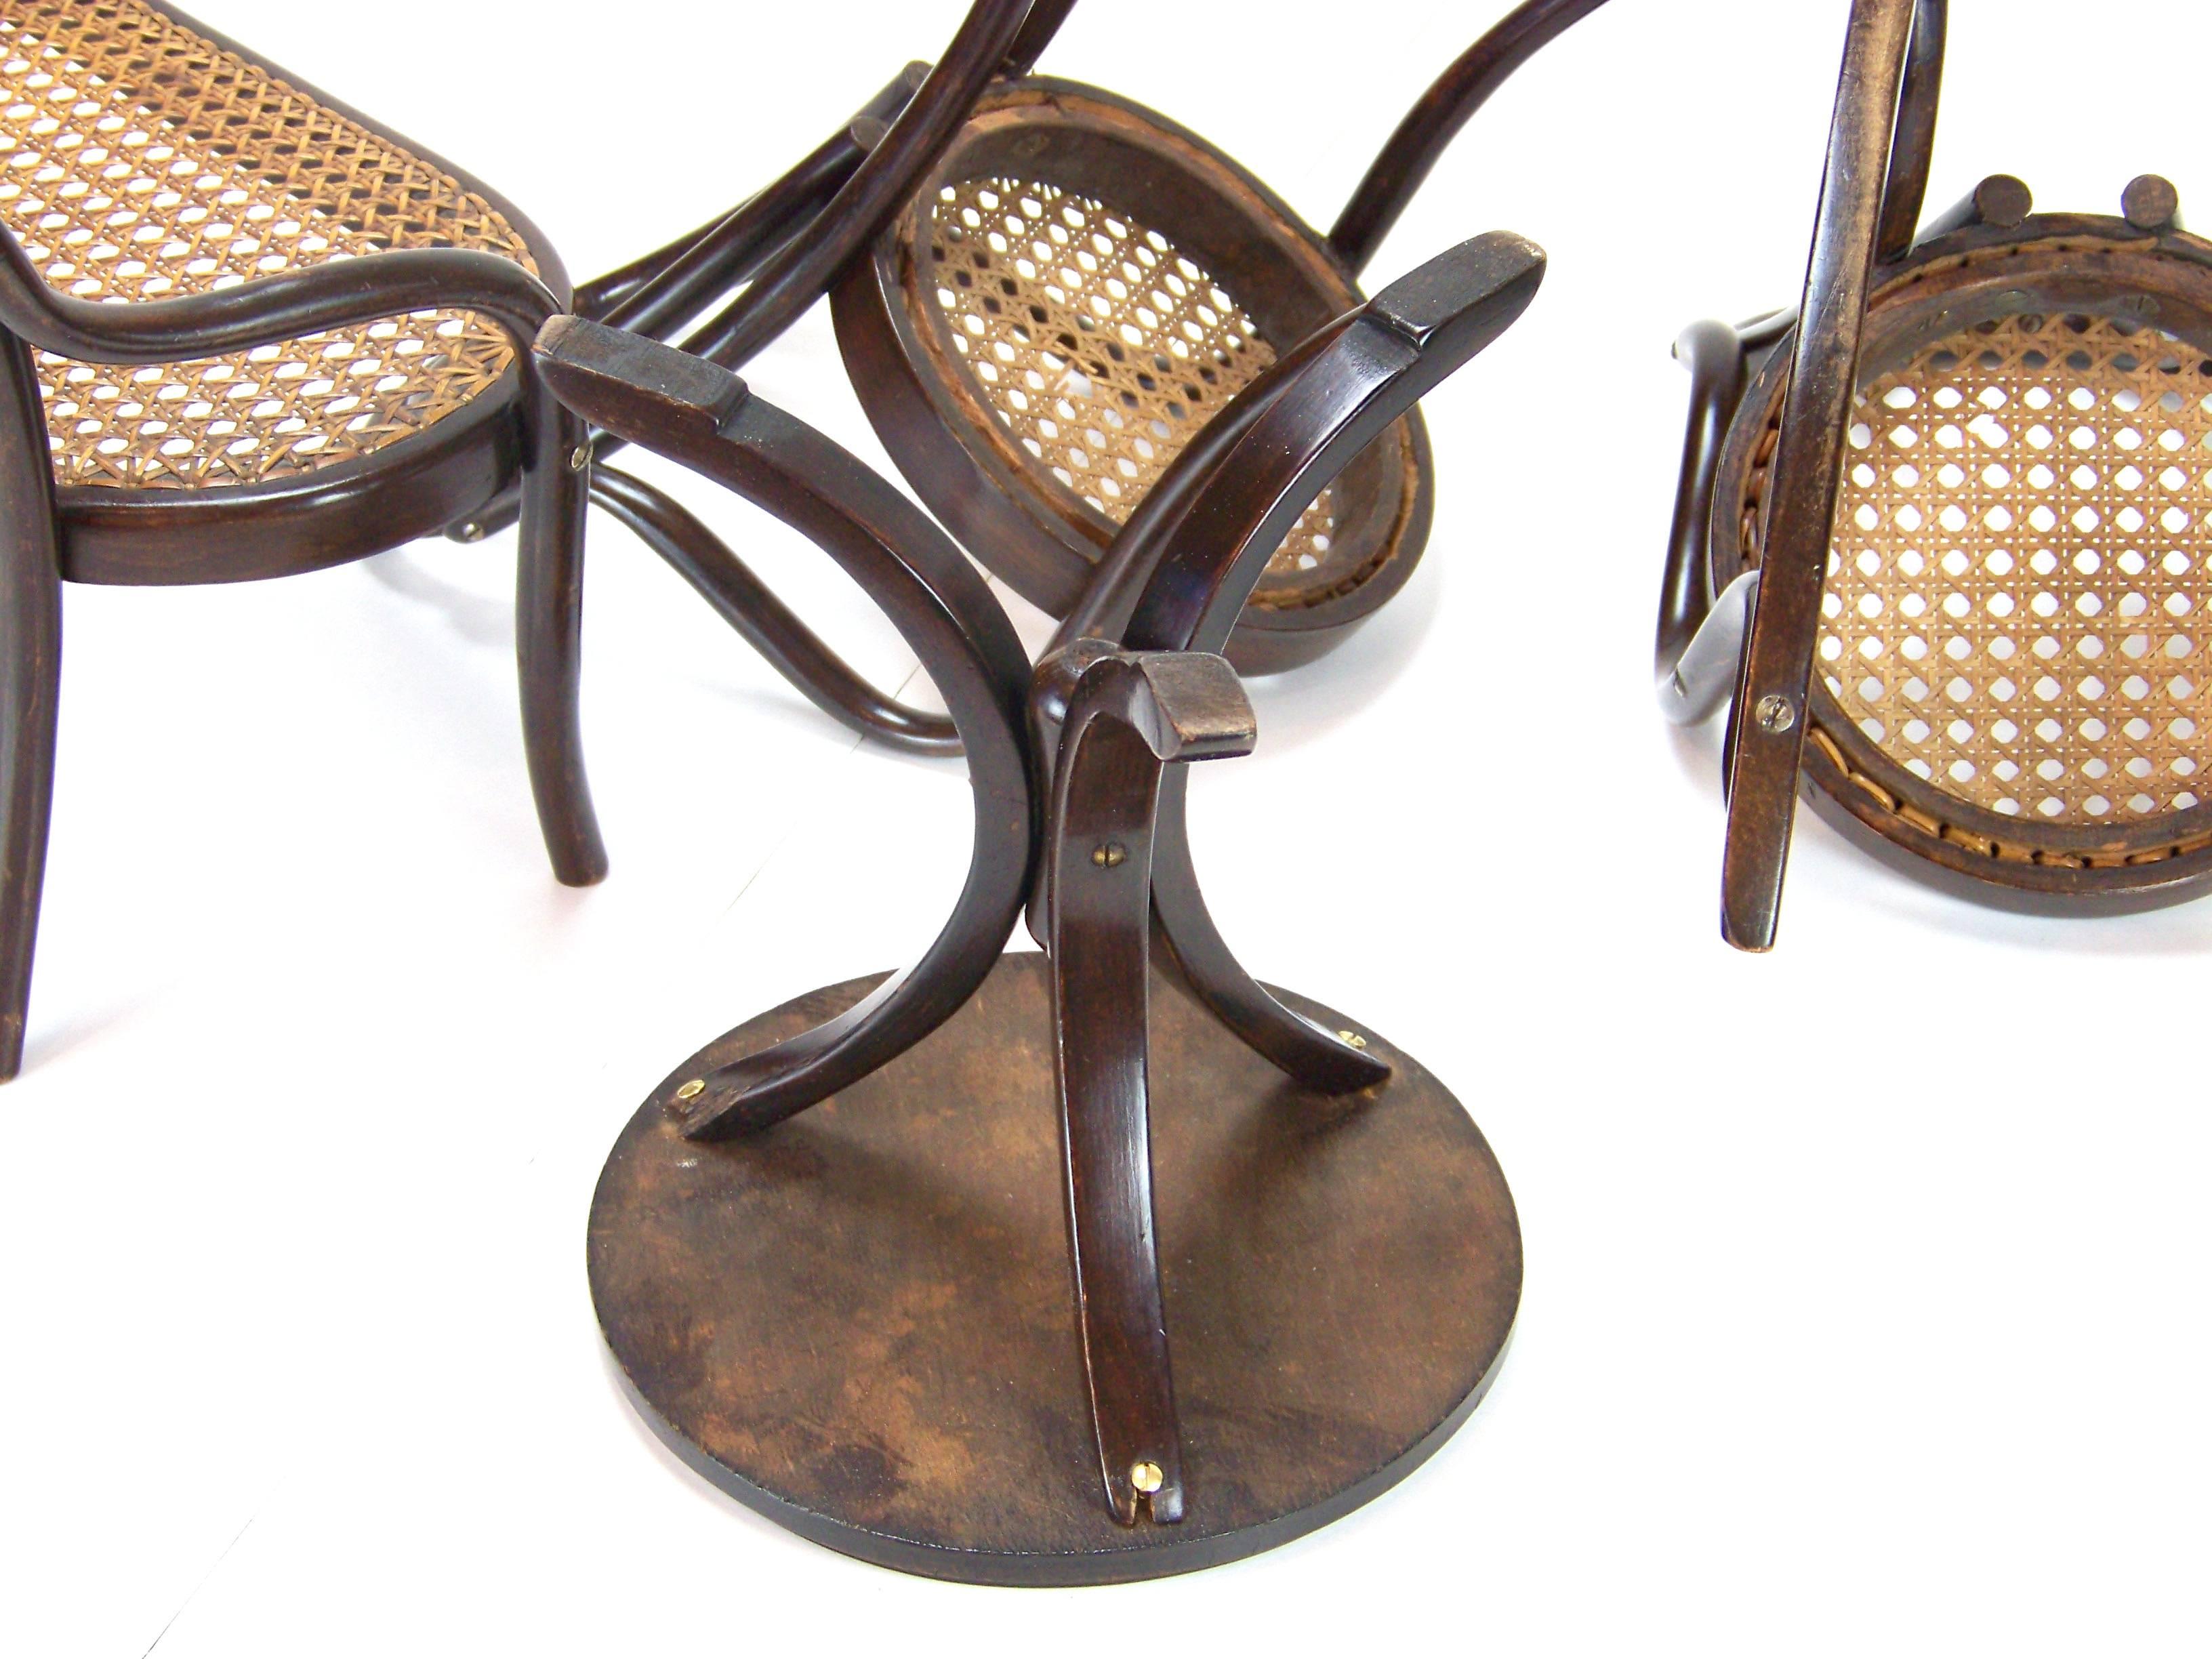 Beech Seating for Dolls by Thonet-Mundus, circa 1930